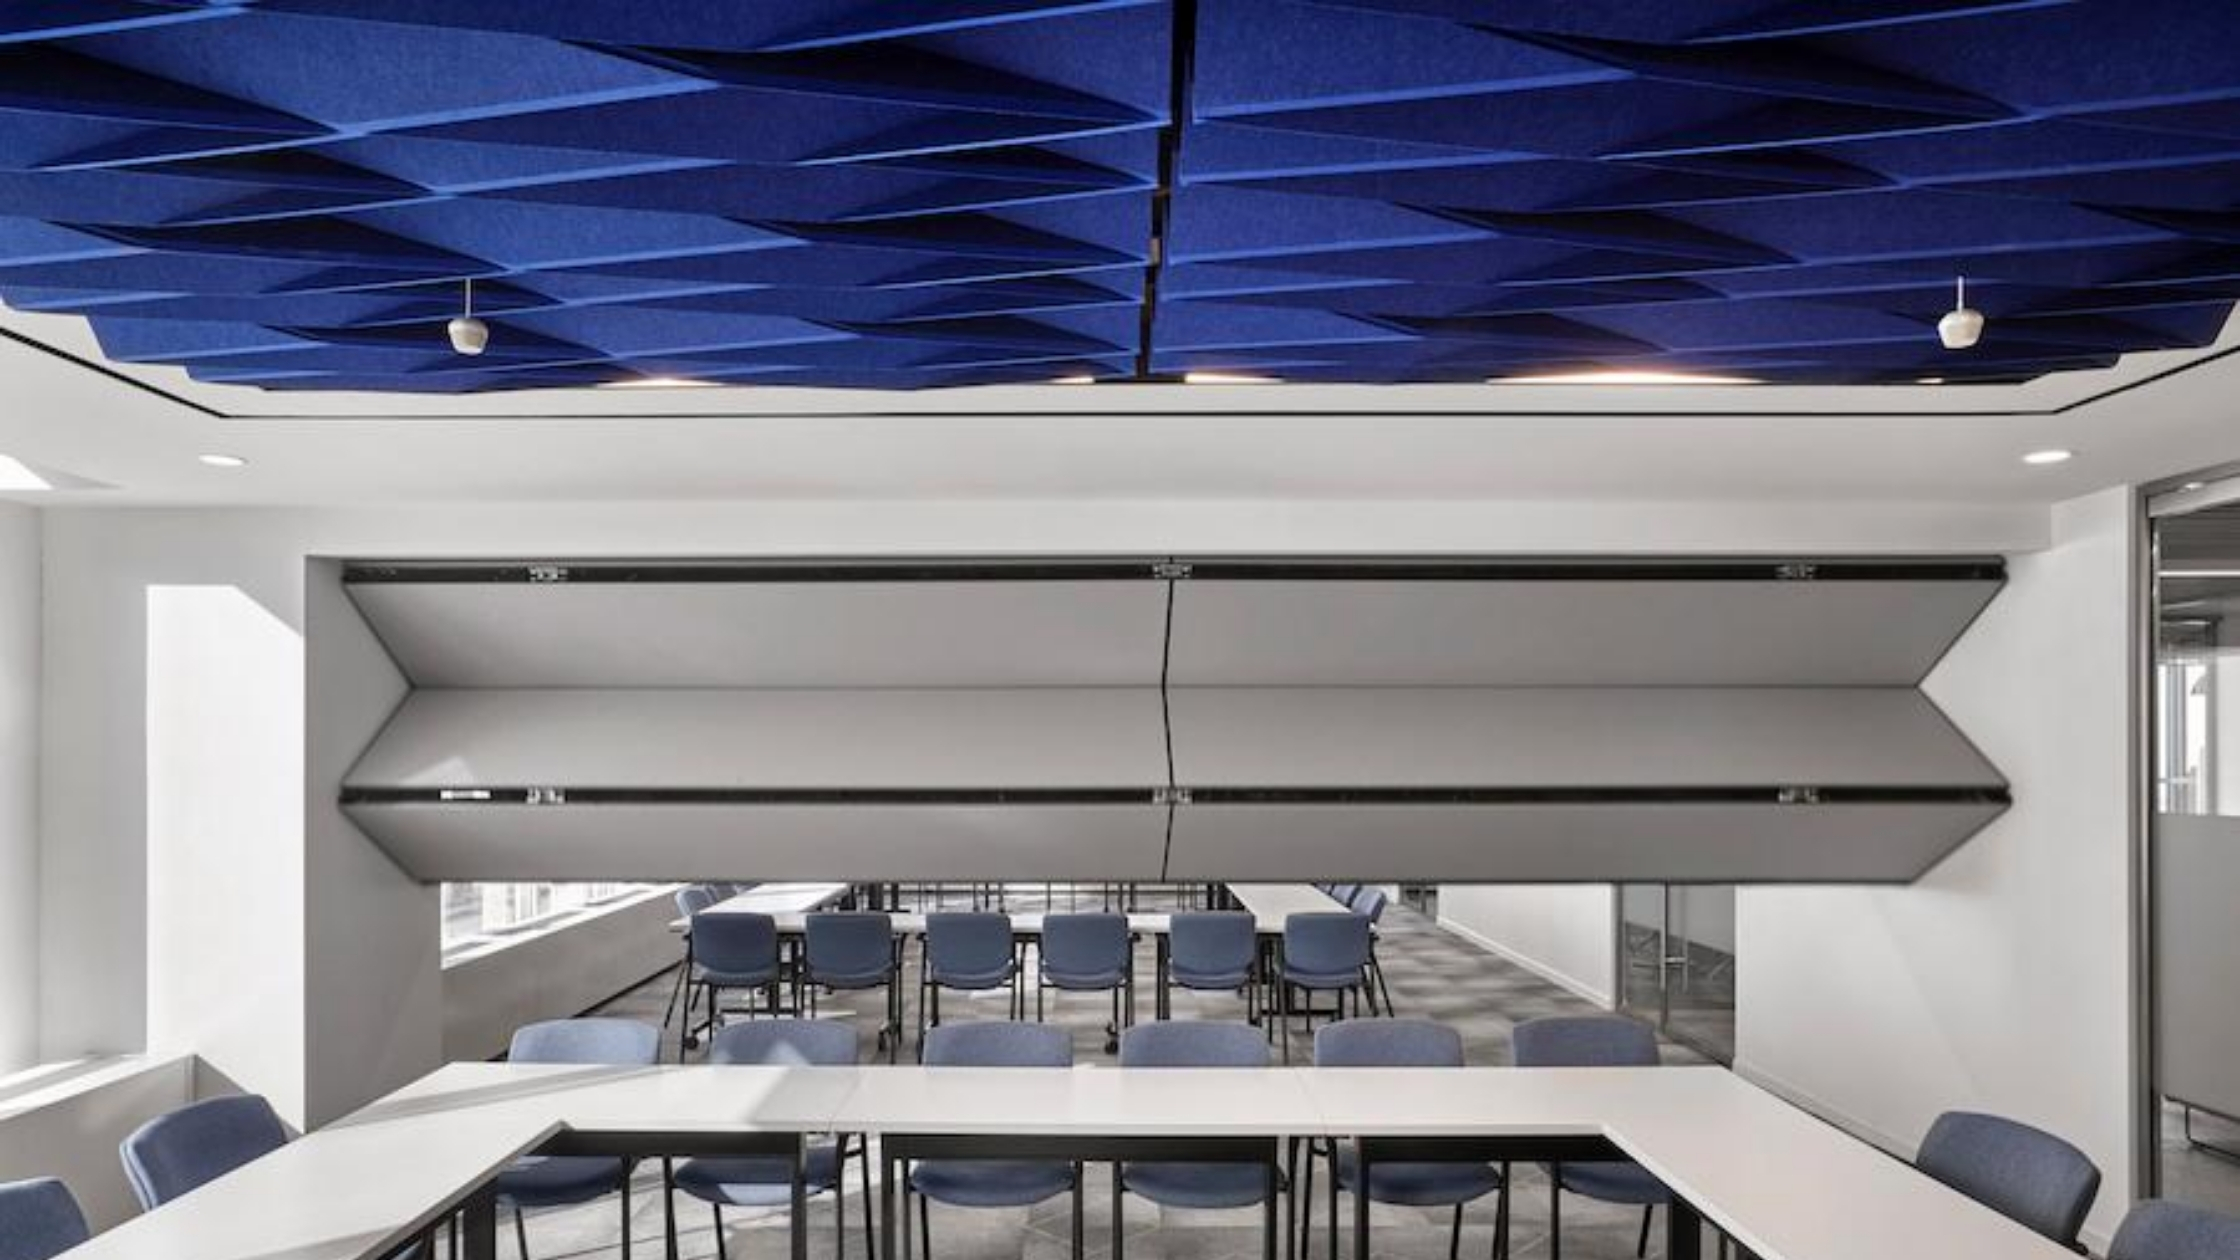 White Skyfold Classic operable partition folding from the ceiling to subdivide an office conference room that has blue acoustic ceiling baffles.